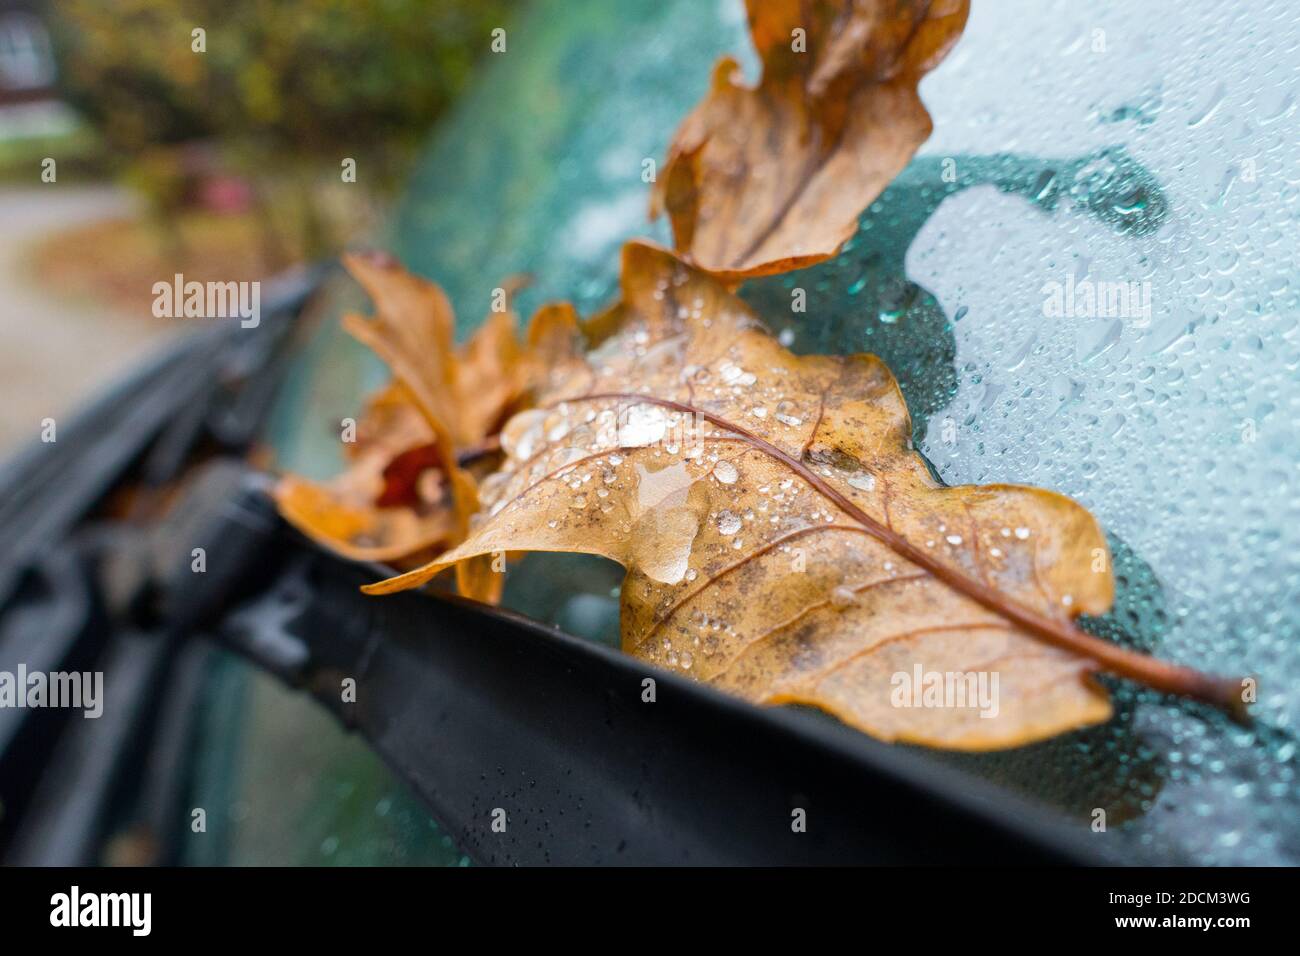 An autumnal leaf with morning dew drops sits on a vehicle windscreen wiper blade Stock Photo